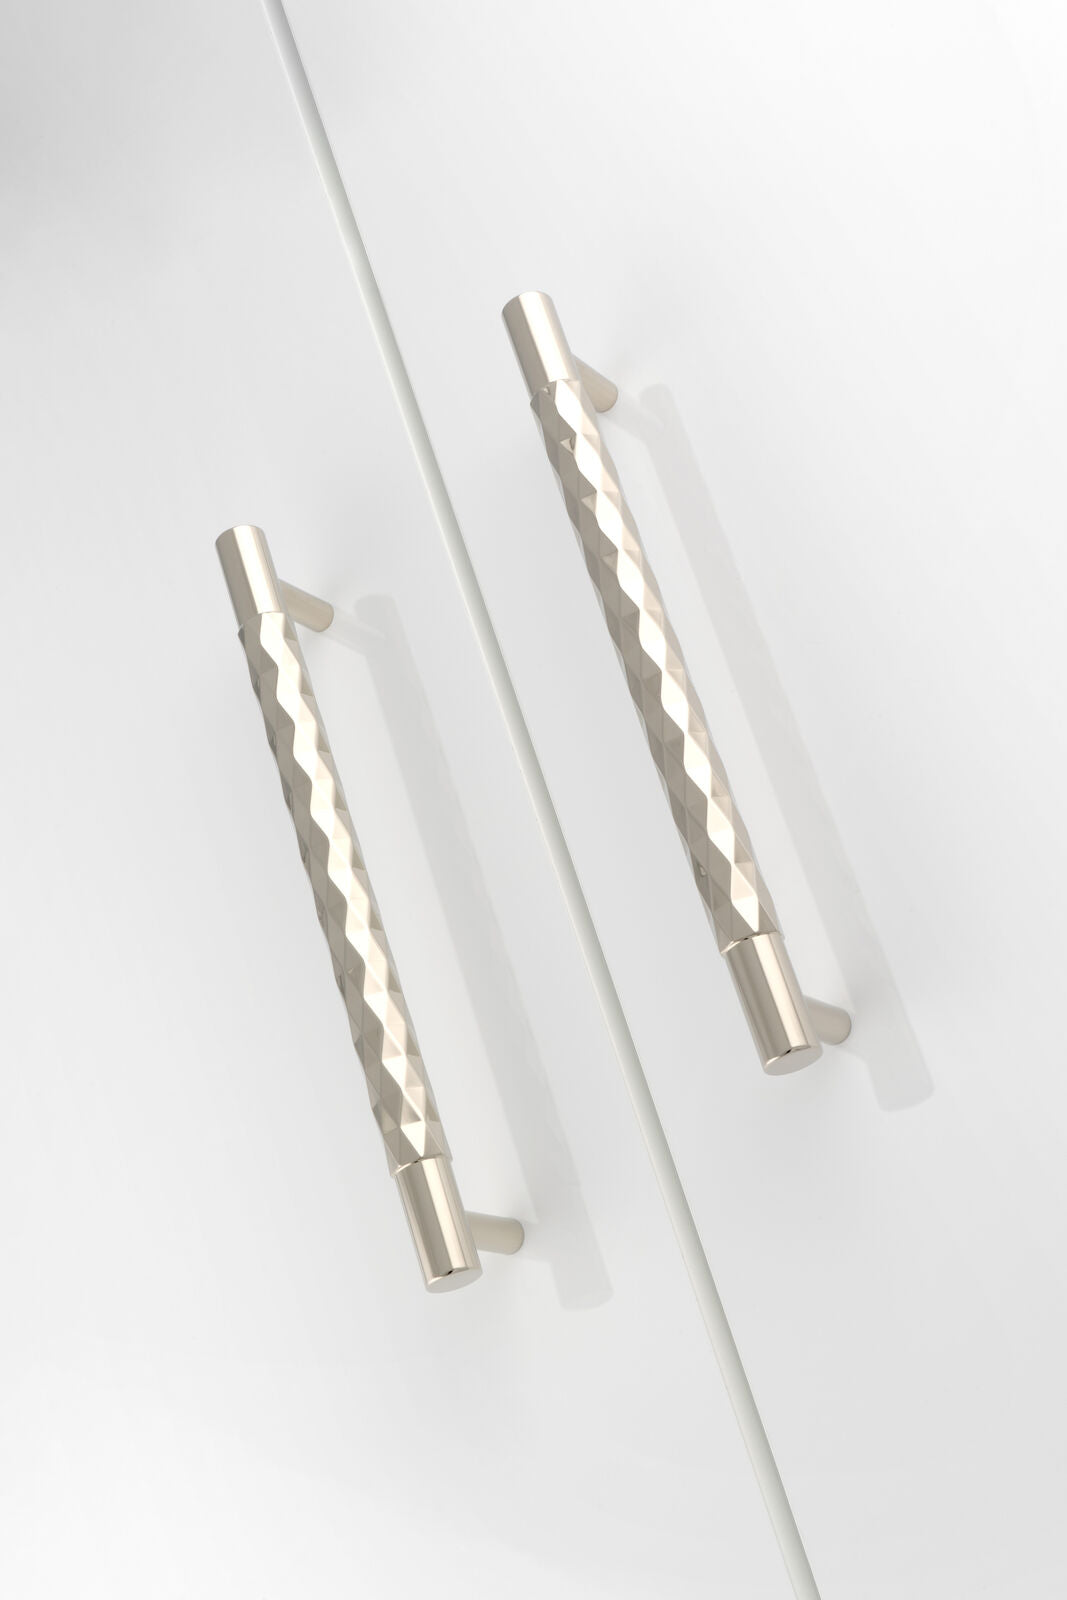 This is an image showing Alexander & Wilks Diamond Cut Cabinet Pull Handle - 160mm C/C - Polished Nickel PVD - AW846-160-PNPVD available to order from Trade Door Handles in Kendal, quick delivery and discounted prices.